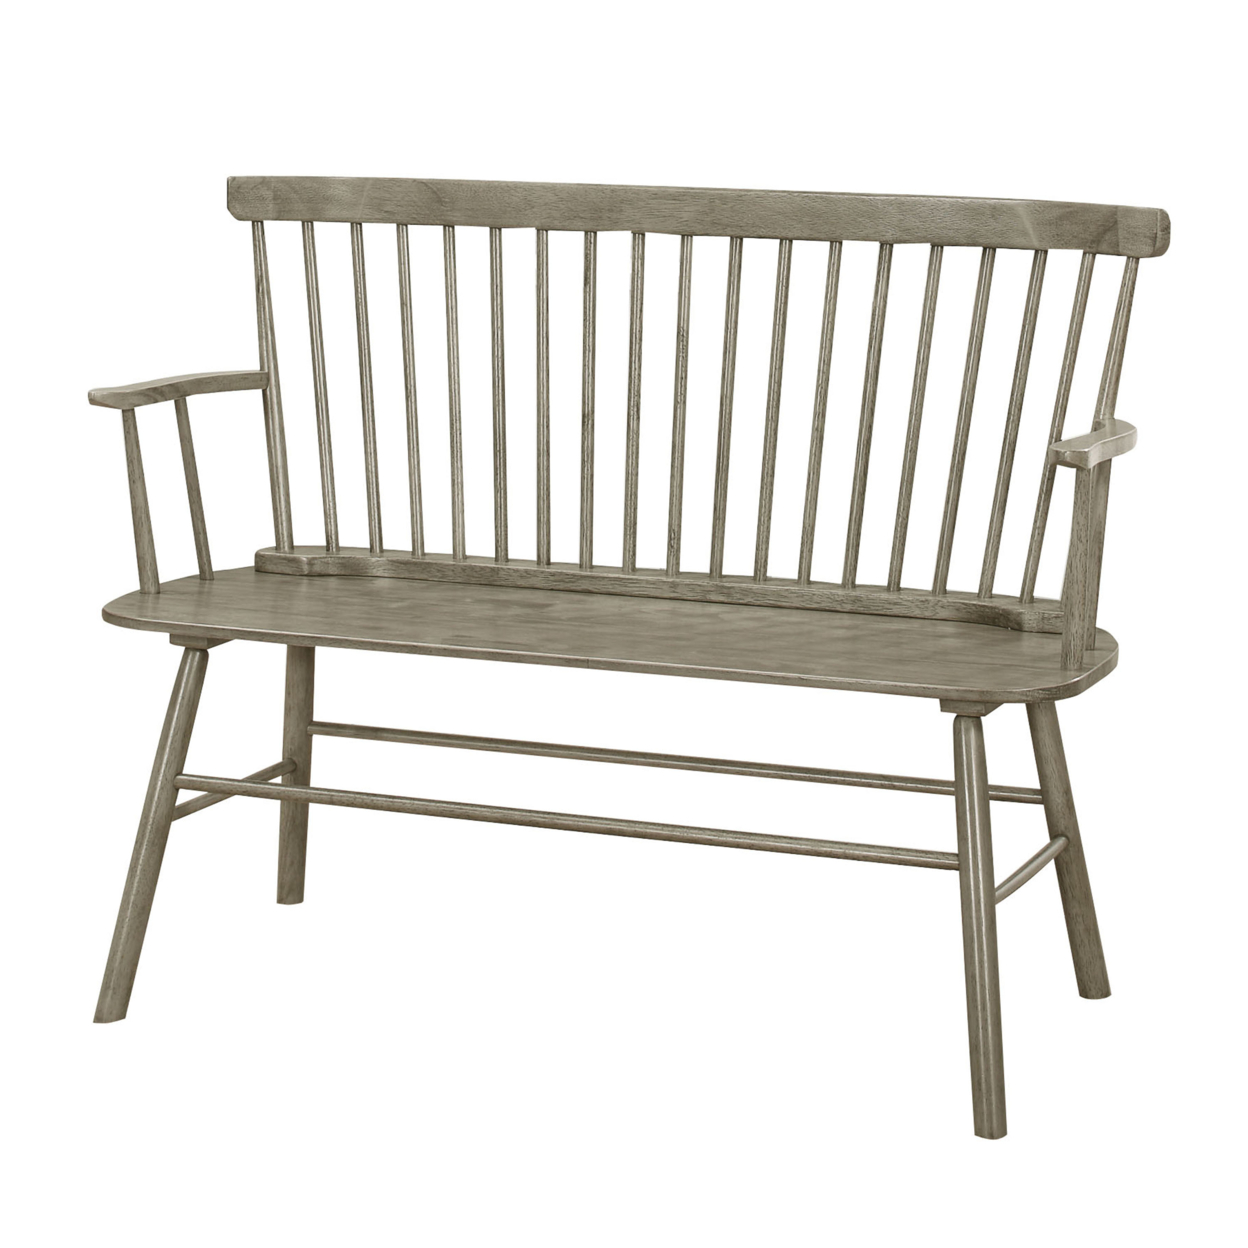 Transitional Style Curved Design Spindle Back Bench With Splayed Legs,Gray- Saltoro Sherpi